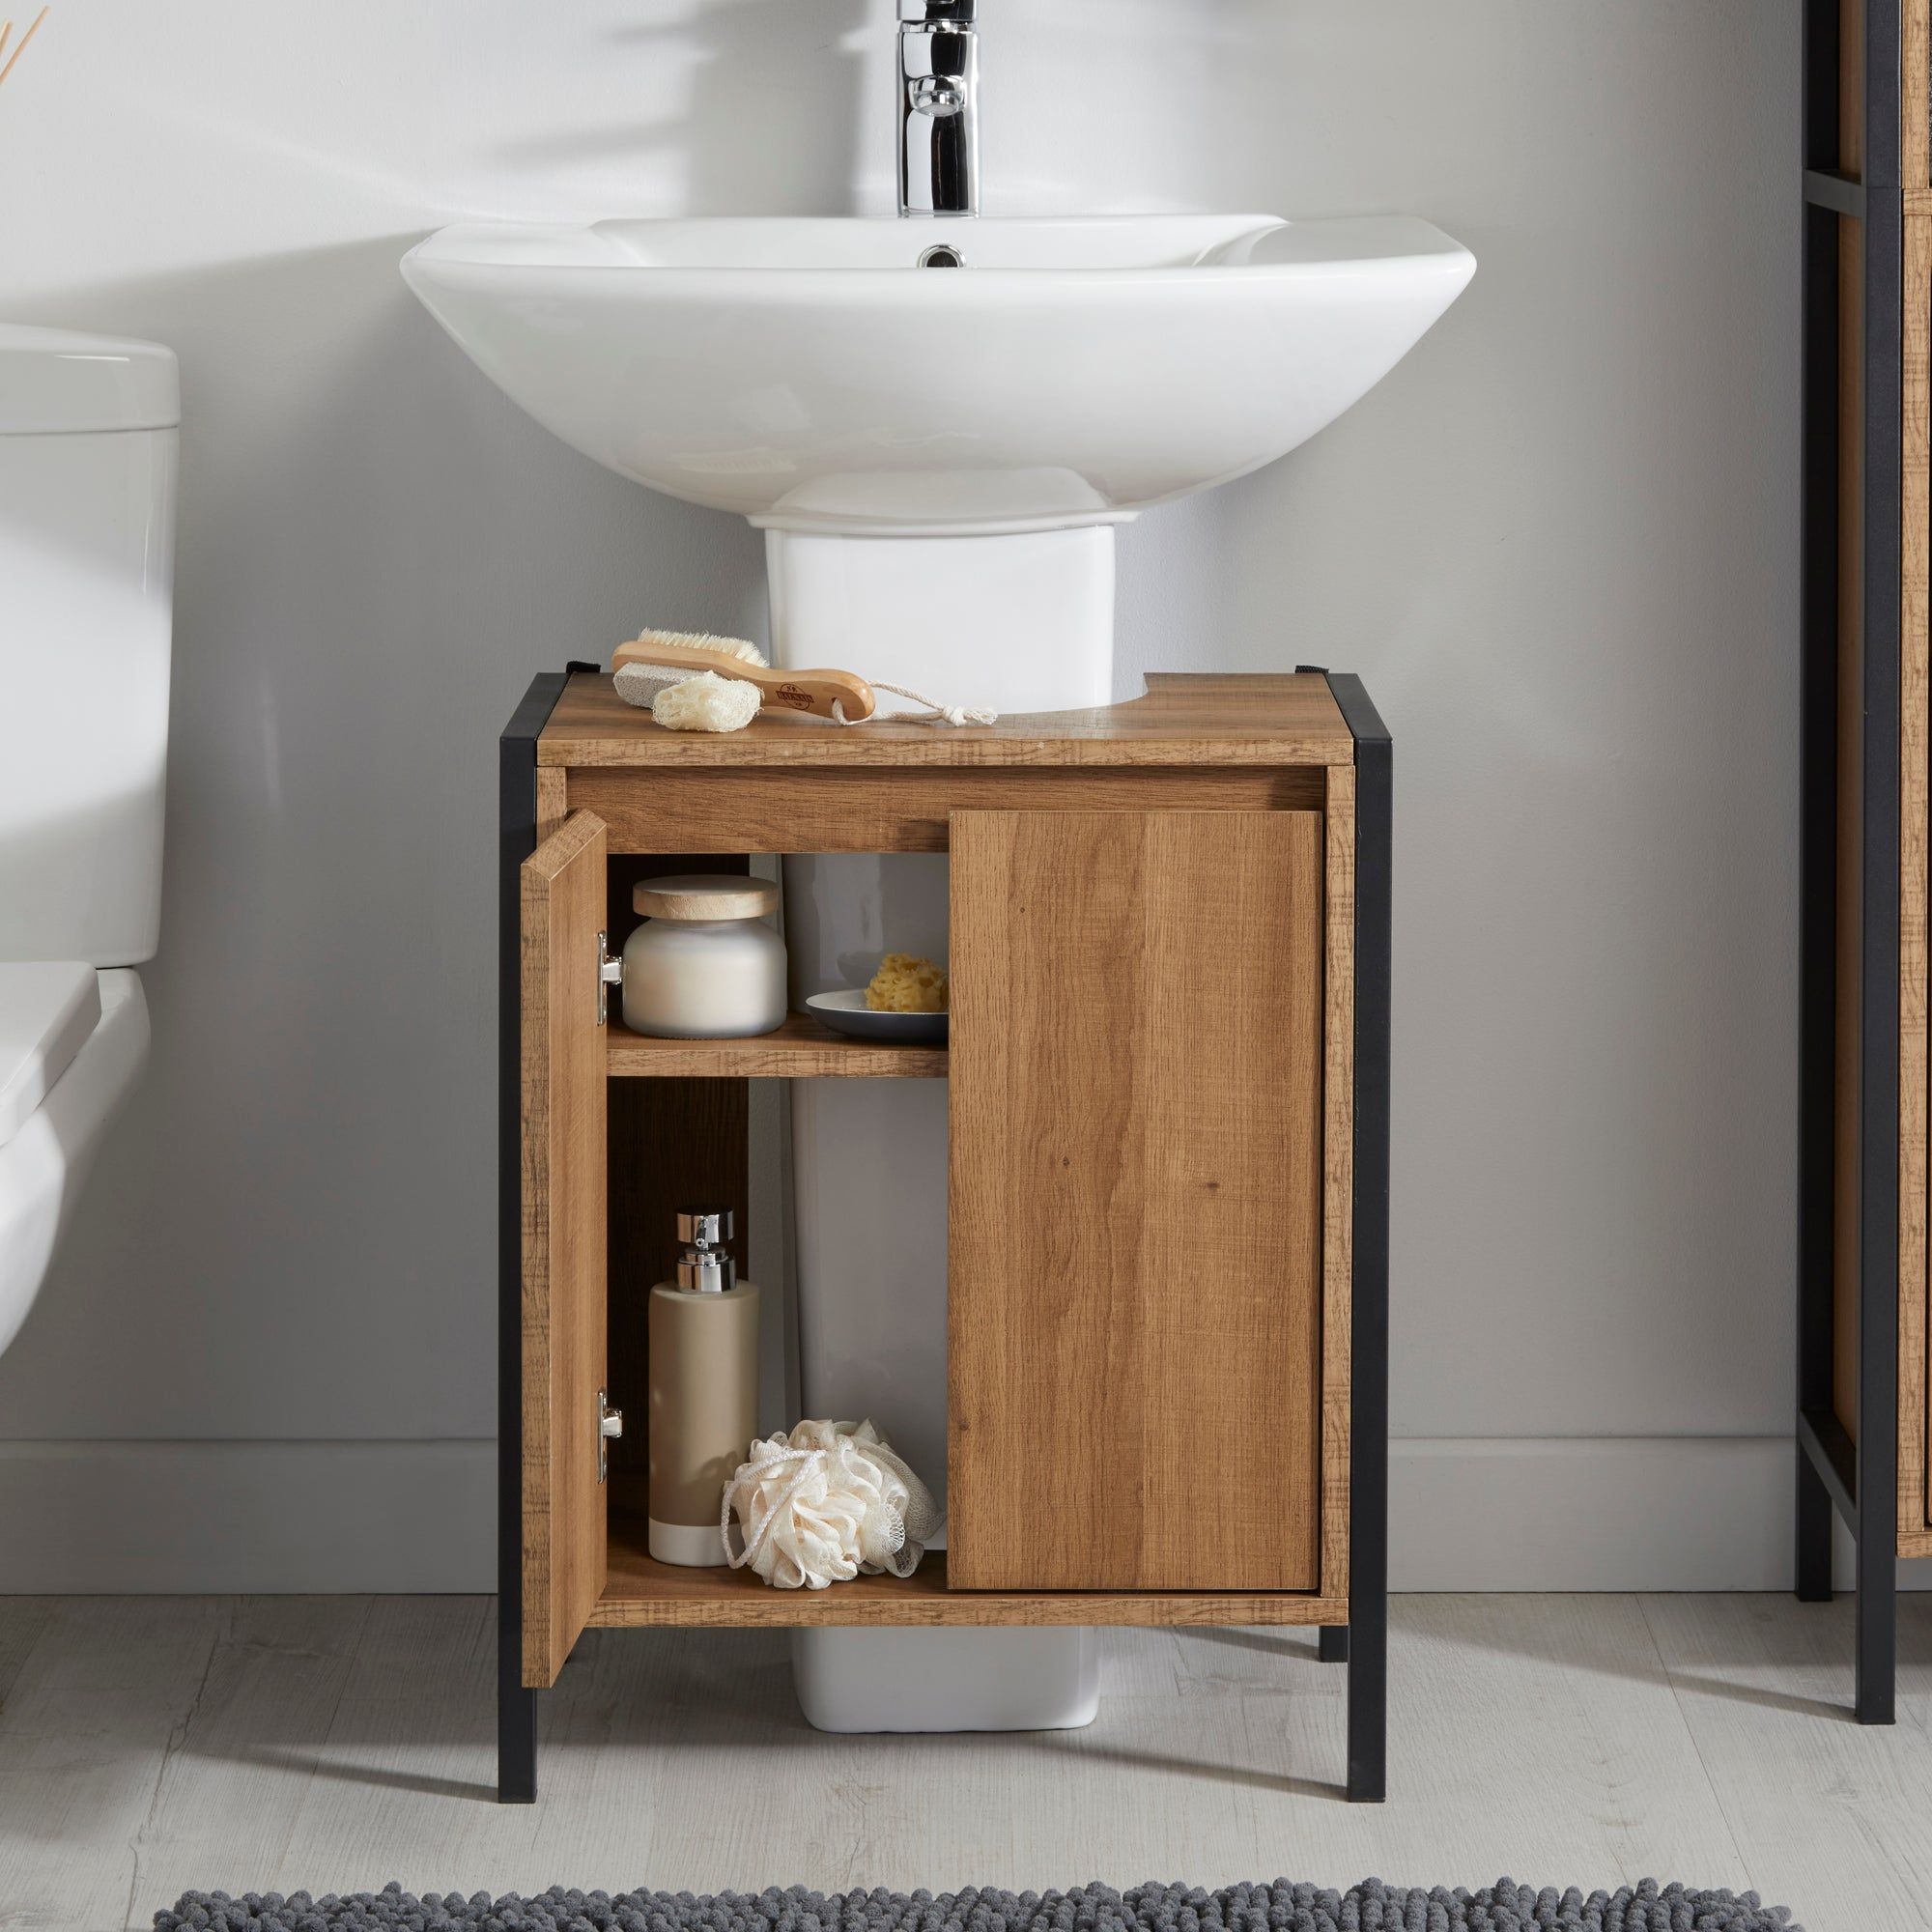 Bathroom Sink Units with Ample Storage Space